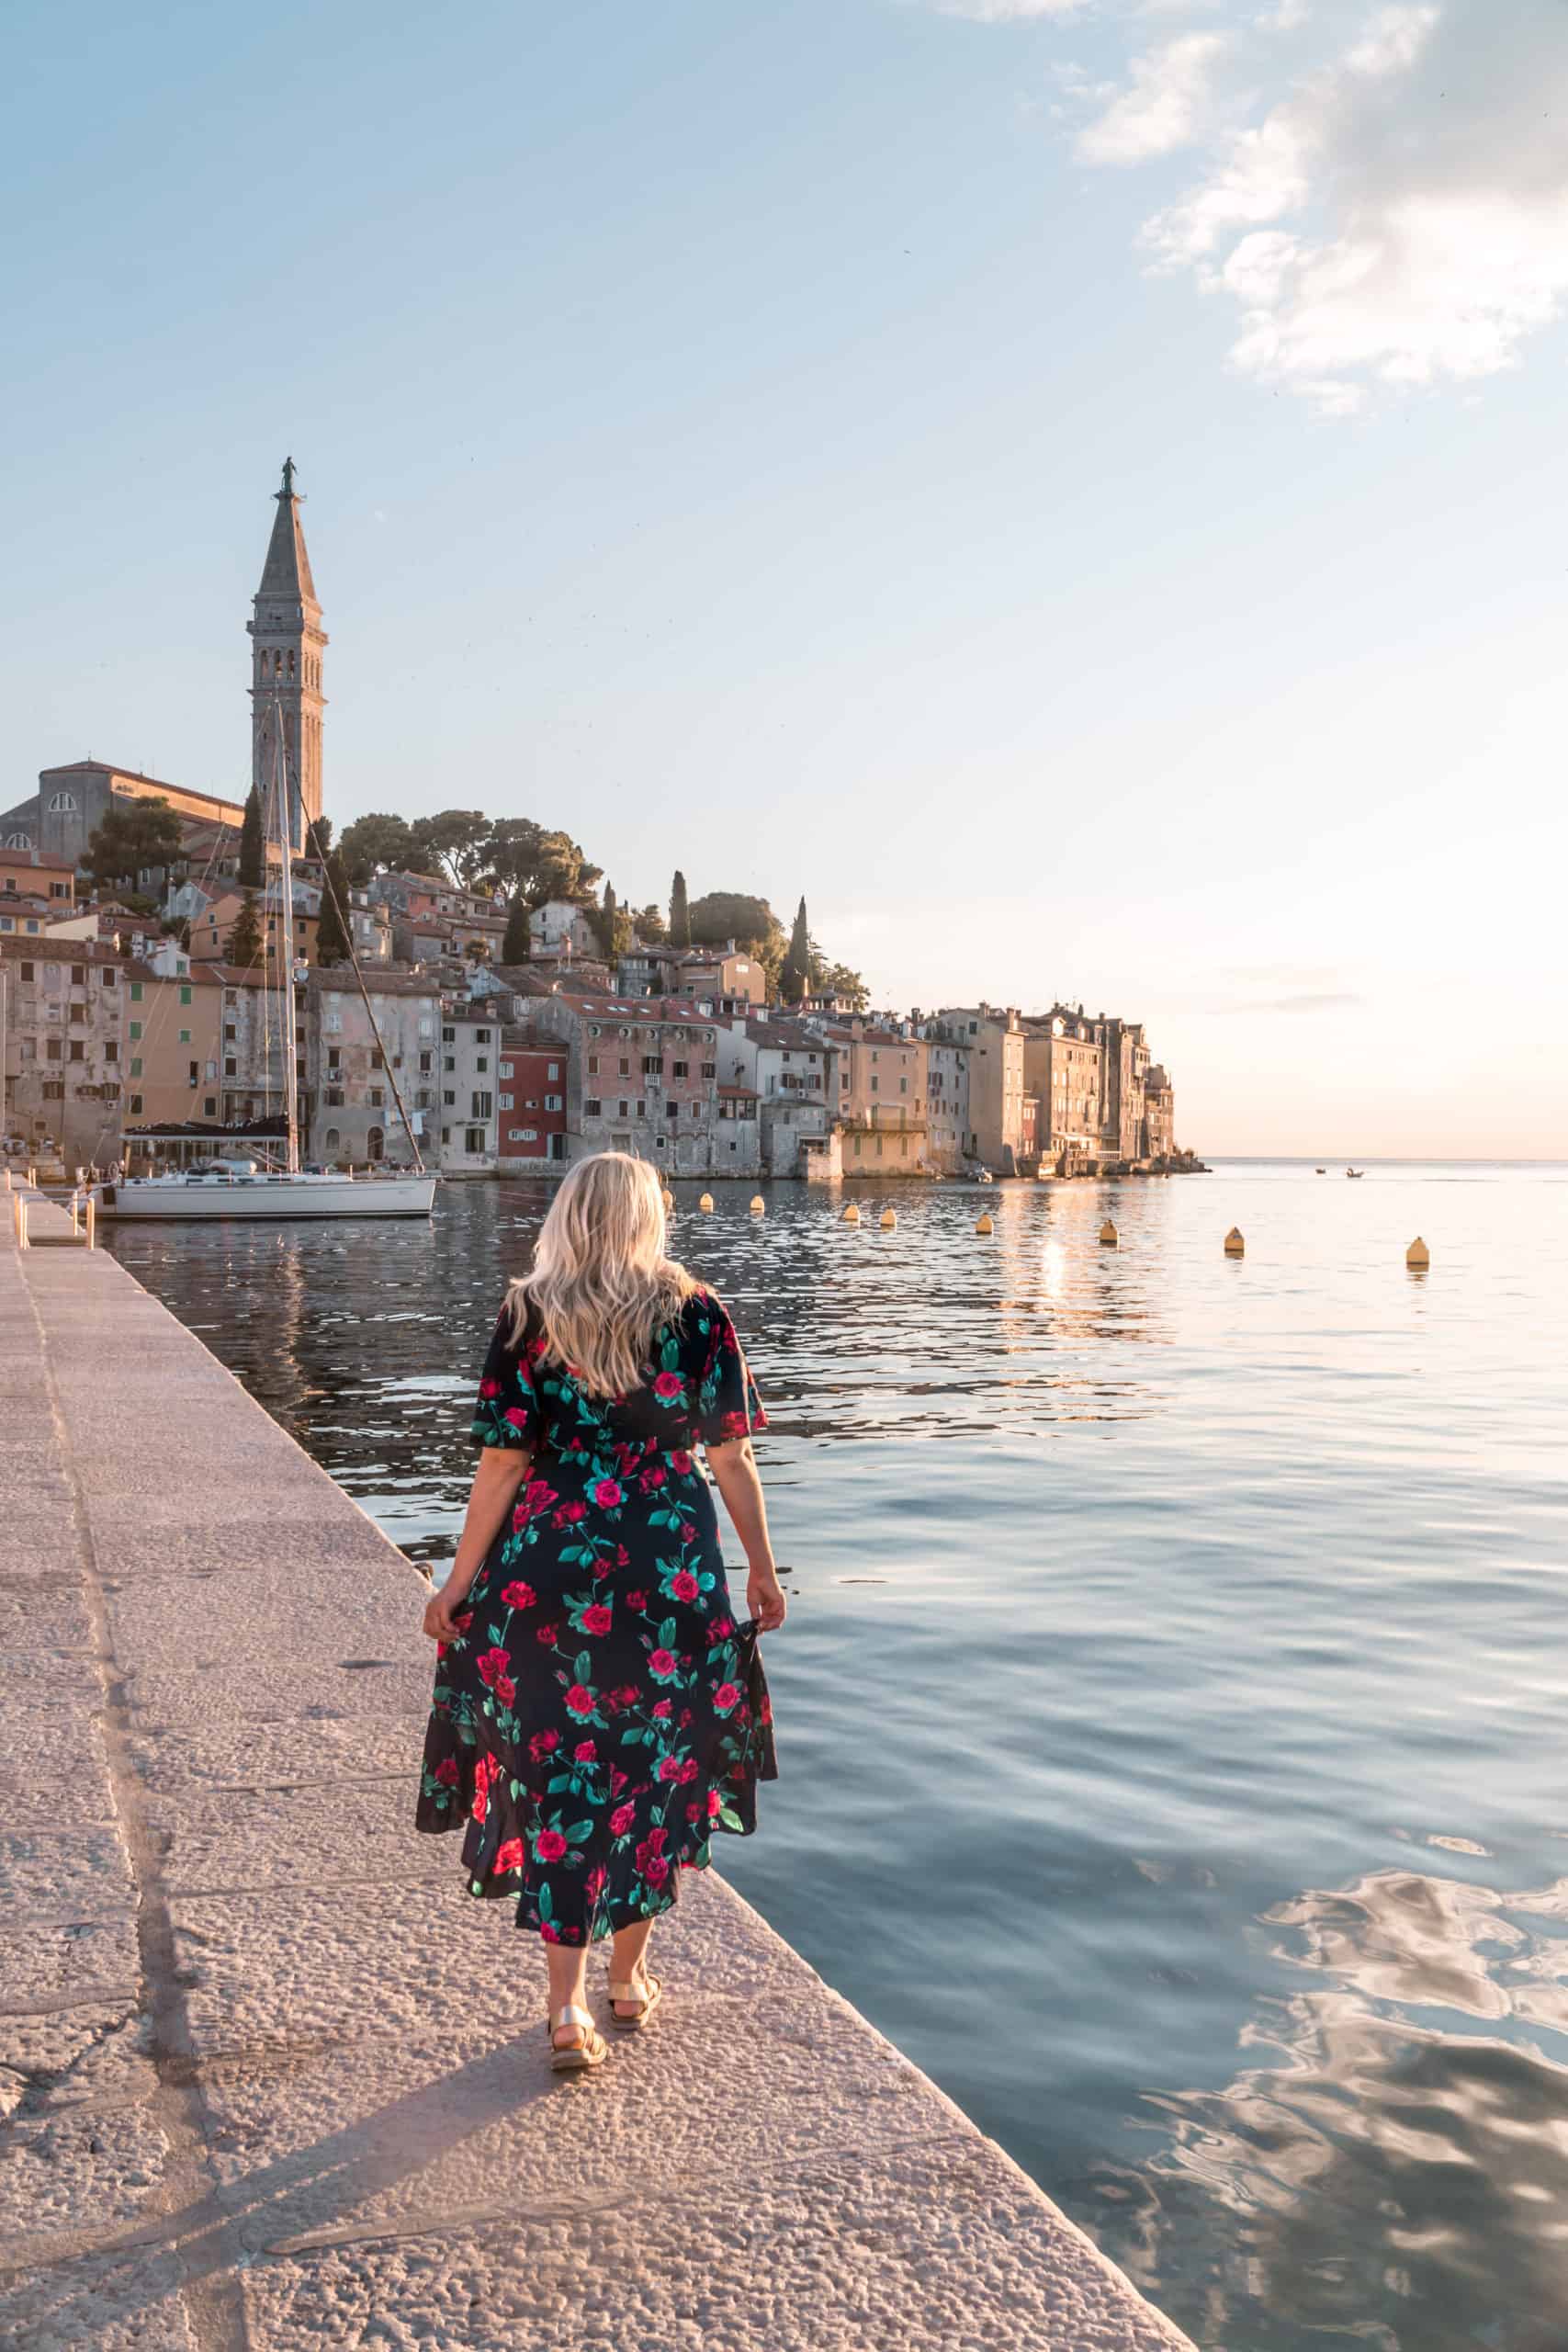 Floral Dress | Where to Find the Best Travel Dresses - My Favorite Travel Style and Outfits | The Republic of Rose